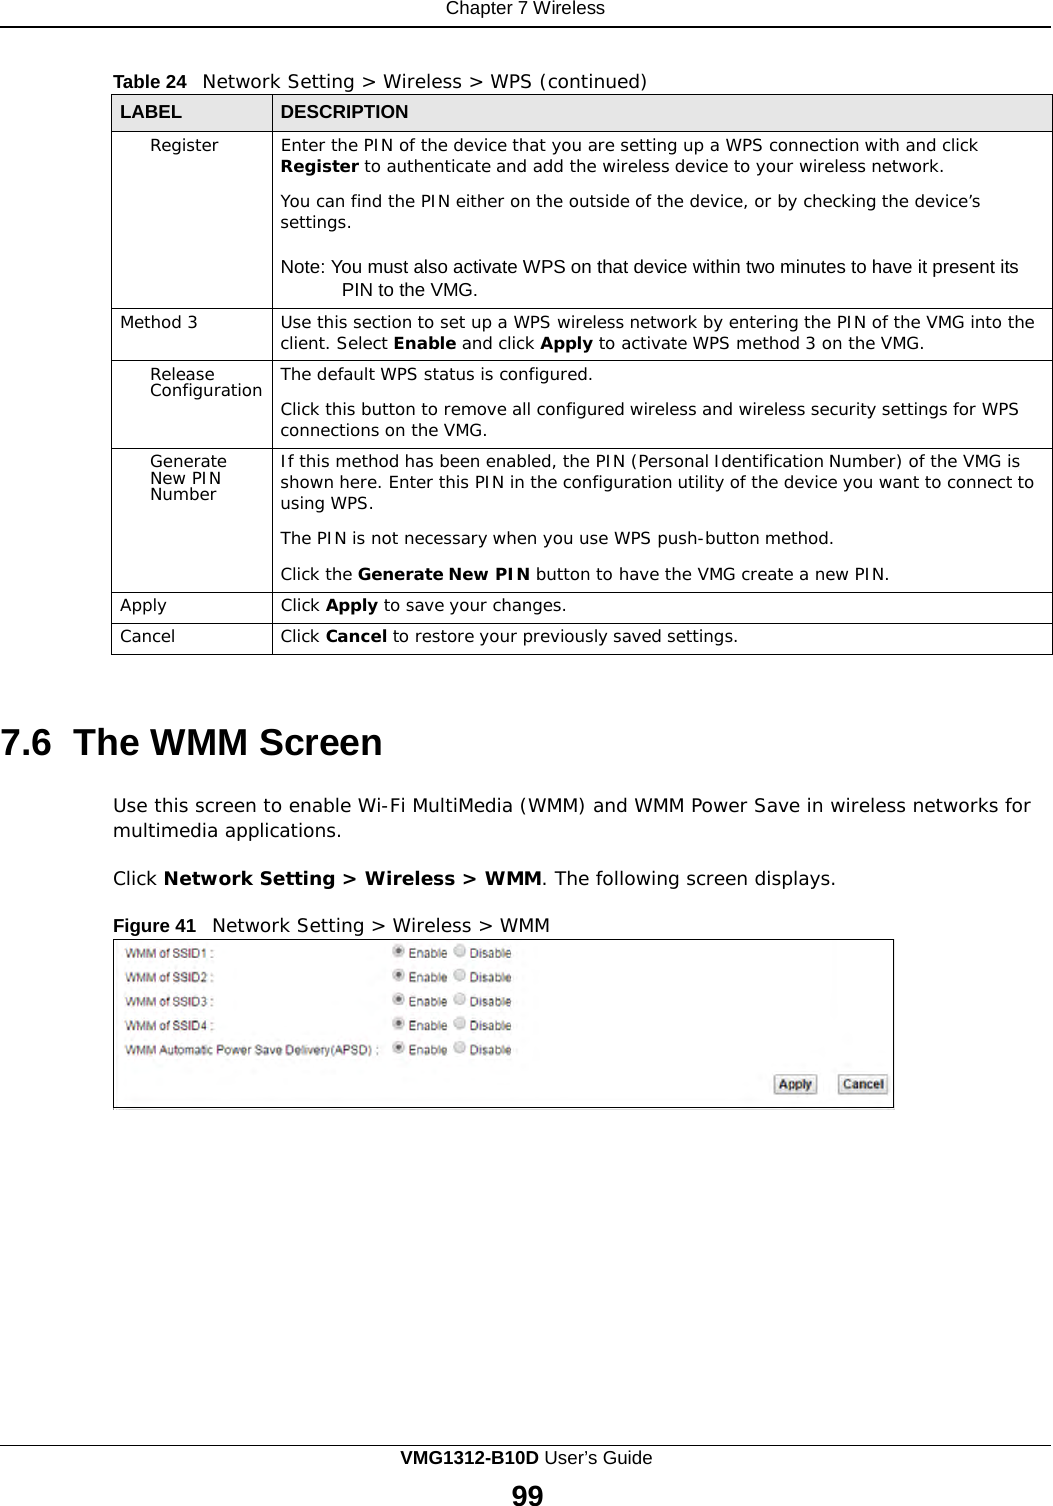 Chapter 7 Wireless      Table 24   Network Setting &gt; Wireless &gt; WPS (continued)  LABEL DESCRIPTION Register Enter the PIN of the device that you are setting up a WPS connection with and click Register to authenticate and add the wireless device to your wireless network.  You can find the PIN either on the outside of the device, or by checking the device’s settings.  Note: You must also activate WPS on that device within two minutes to have it present its PIN to the VMG. Method 3 Use this section to set up a WPS wireless network by entering the PIN of the VMG into the client. Select Enable and click Apply to activate WPS method 3 on the VMG. Release Configuration The default WPS status is configured.  Click this button to remove all configured wireless and wireless security settings for WPS connections on the VMG. Generate New PIN Number If this method has been enabled, the PIN (Personal Identification Number) of the VMG is shown here. Enter this PIN in the configuration utility of the device you want to connect to using WPS.  The PIN is not necessary when you use WPS push-button method.  Click the Generate New PIN button to have the VMG create a new PIN. Apply Click Apply to save your changes. Cancel Click Cancel to restore your previously saved settings.    7.6 The WMM Screen  Use this screen to enable Wi-Fi MultiMedia (WMM) and WMM Power Save in wireless networks for multimedia applications.  Click Network Setting &gt; Wireless &gt; WMM. The following screen displays.  Figure 41   Network Setting &gt; Wireless &gt; WMM VMG1312-B10D User’s Guide 99  